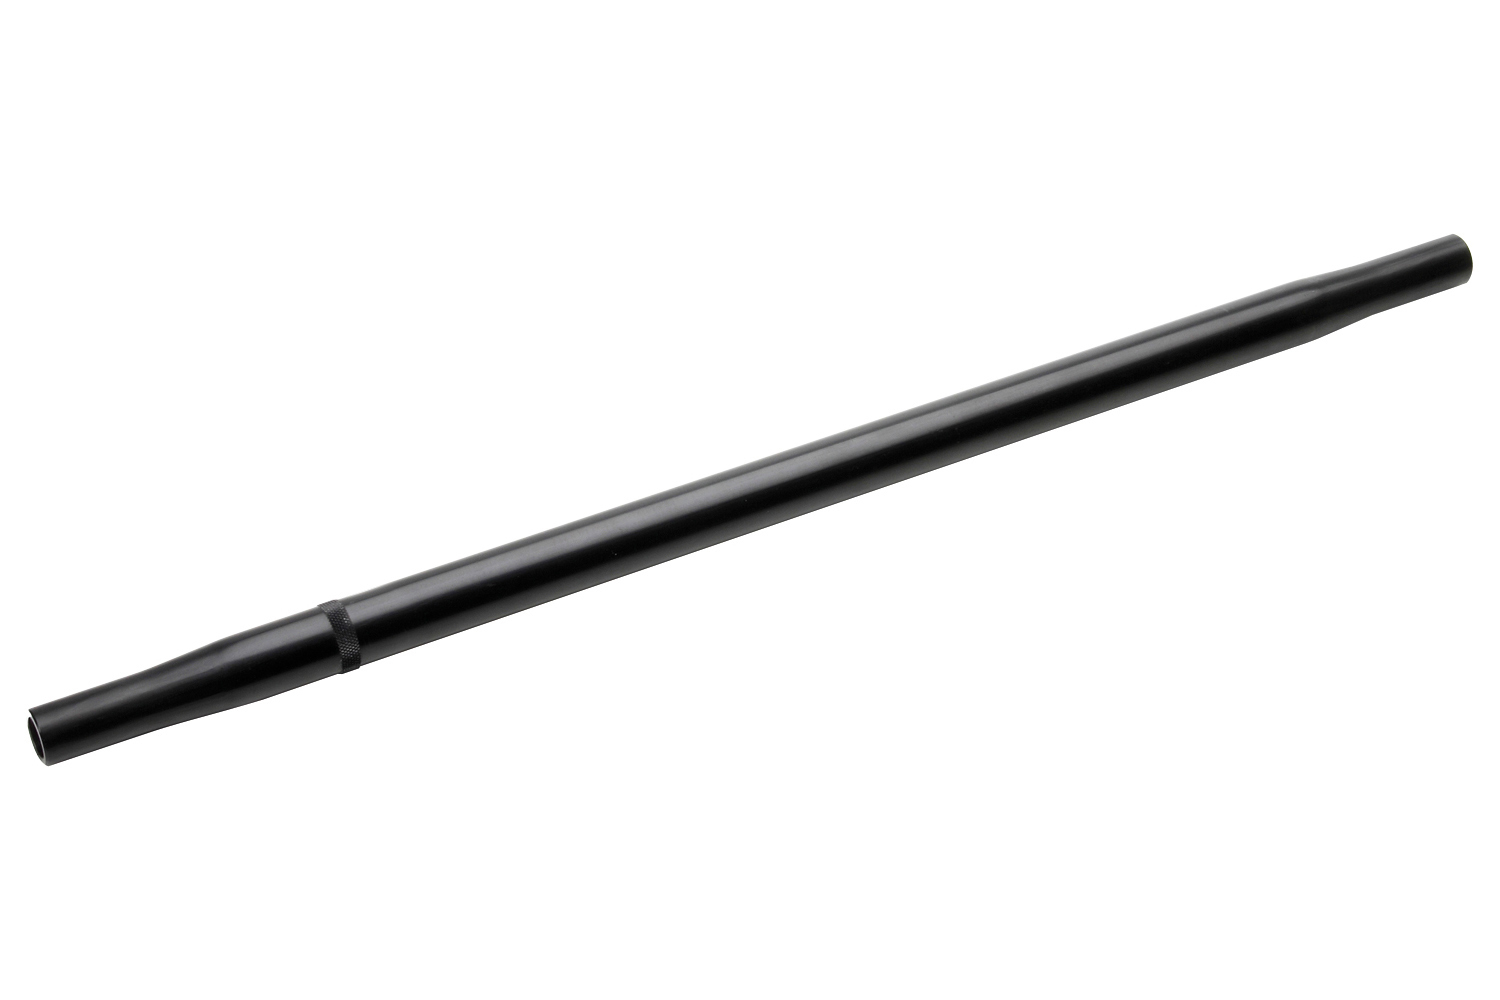 MPD Racing 41305 - Suspension Tube, 1 in OD, 30-1/2 in Long, 5/8 -18 in Female Threads, Aluminum, Black Anodized, Each